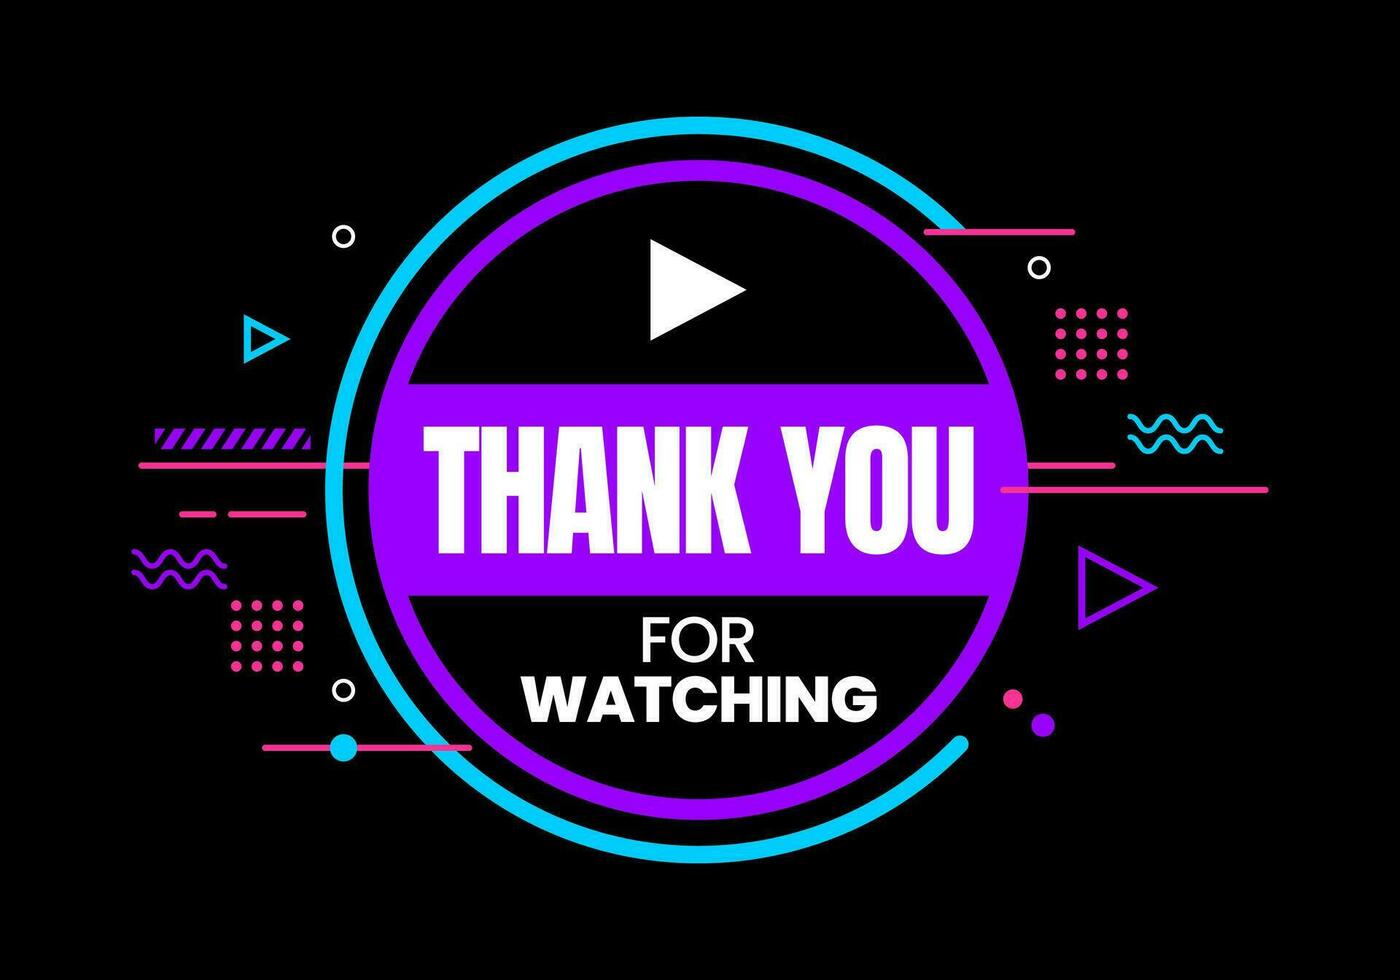 Thank You for Watching Banner text With neo memphis style and Video Icon.Abstract Shapes Compositions. Template for Typography, Outro, Video, Postcard, Poster, Print, Sticker, Web. Vector